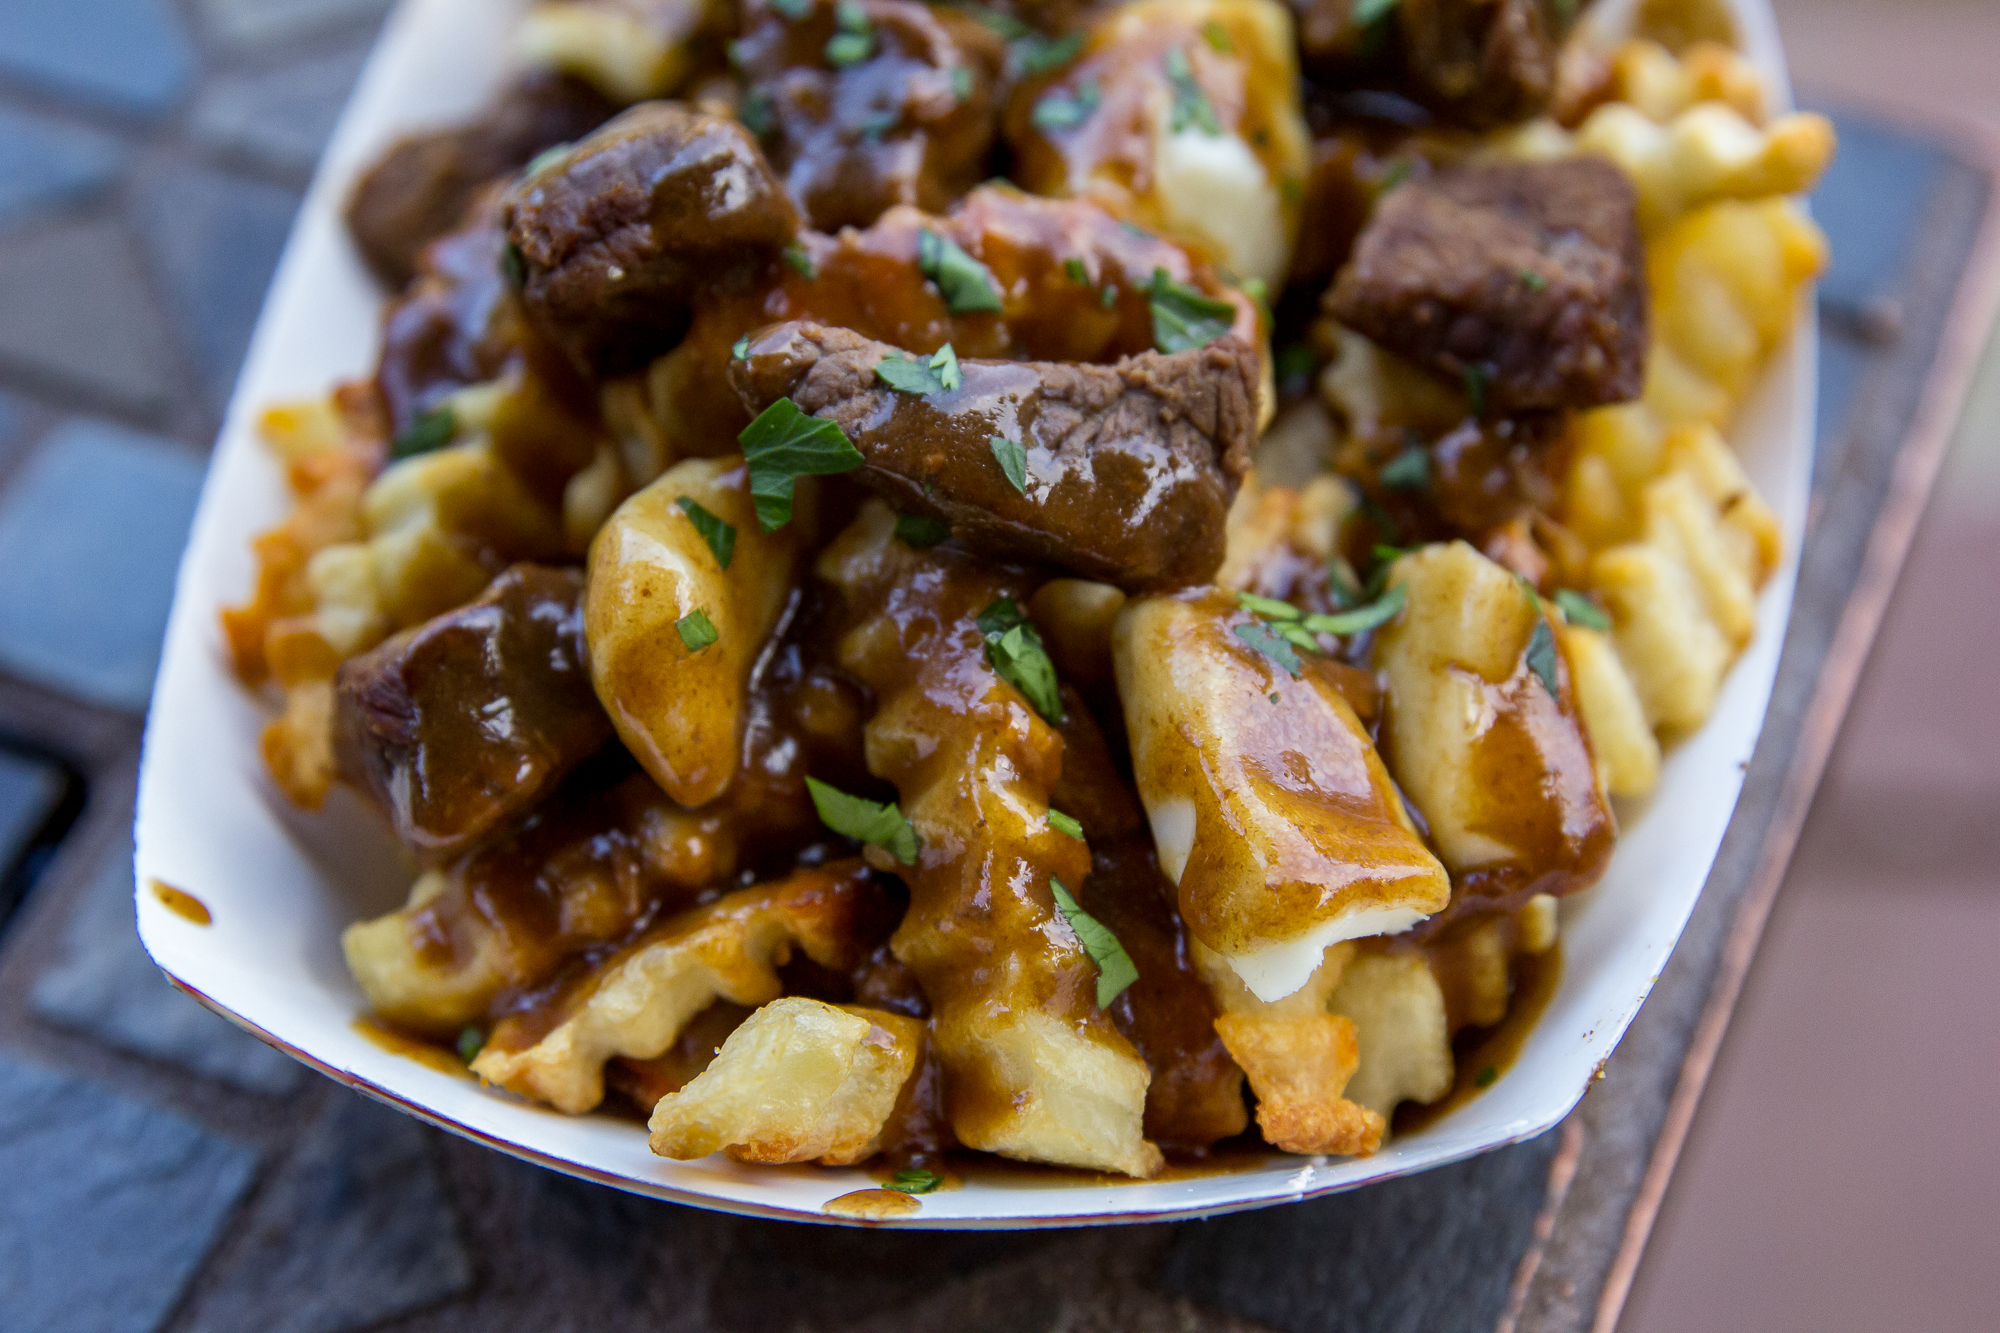 Traeger Poutine with french fries and brown gravy in a paper container